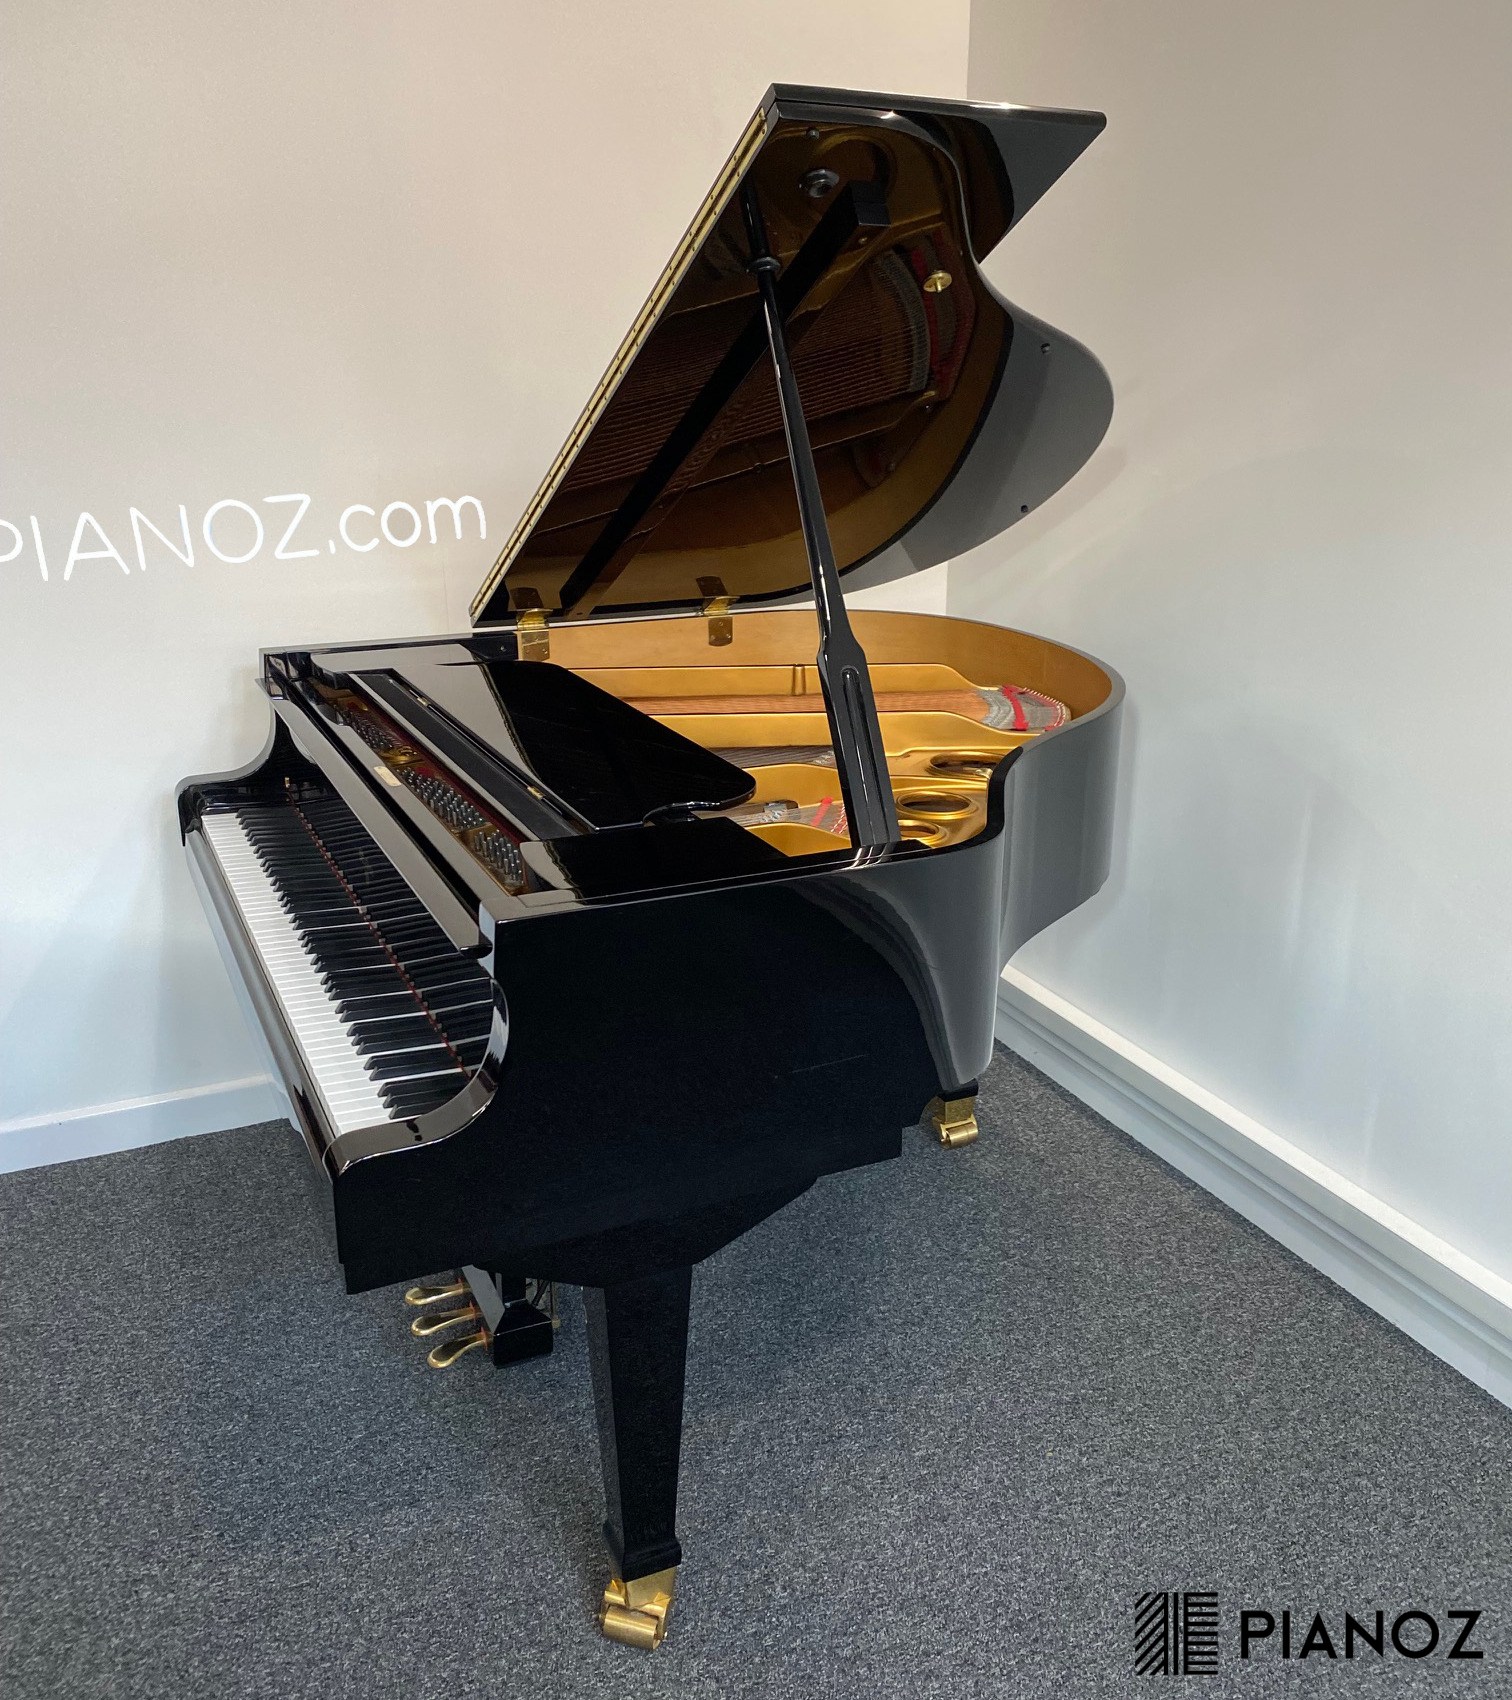 Weber Black High Gloss Baby Grand Piano piano for sale in UK